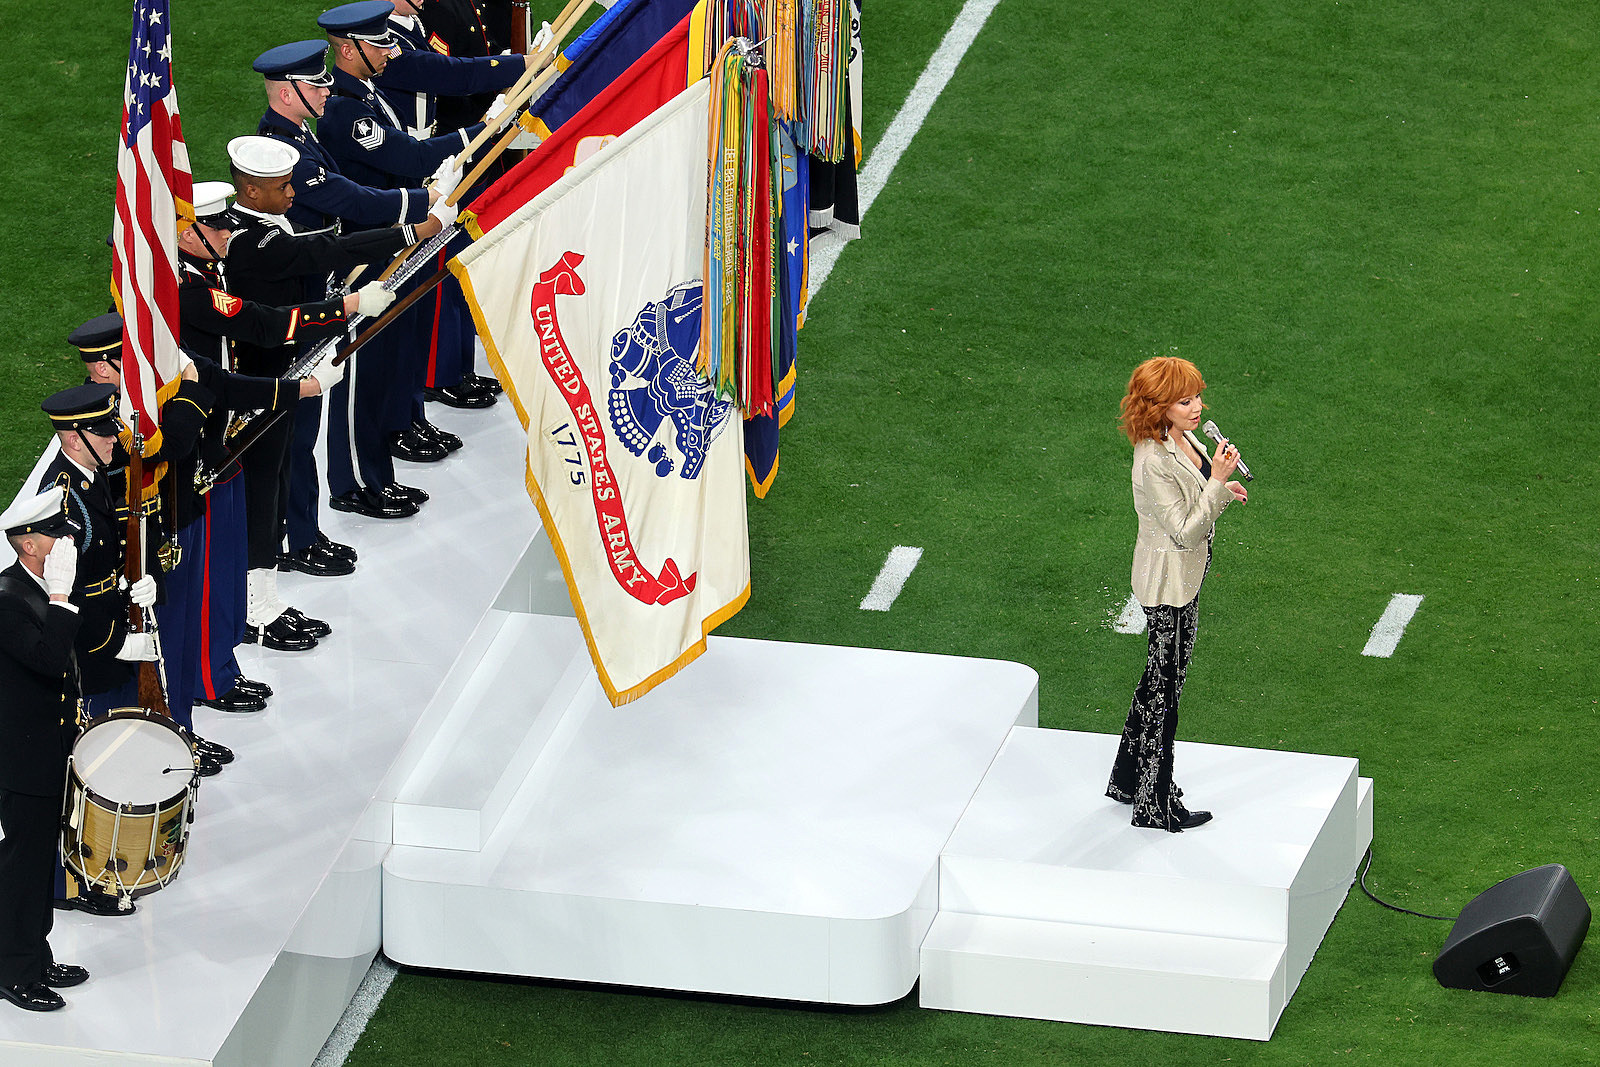 Reba McEntire Dazzles With Her Super Bowl Anthem Performance WKKY